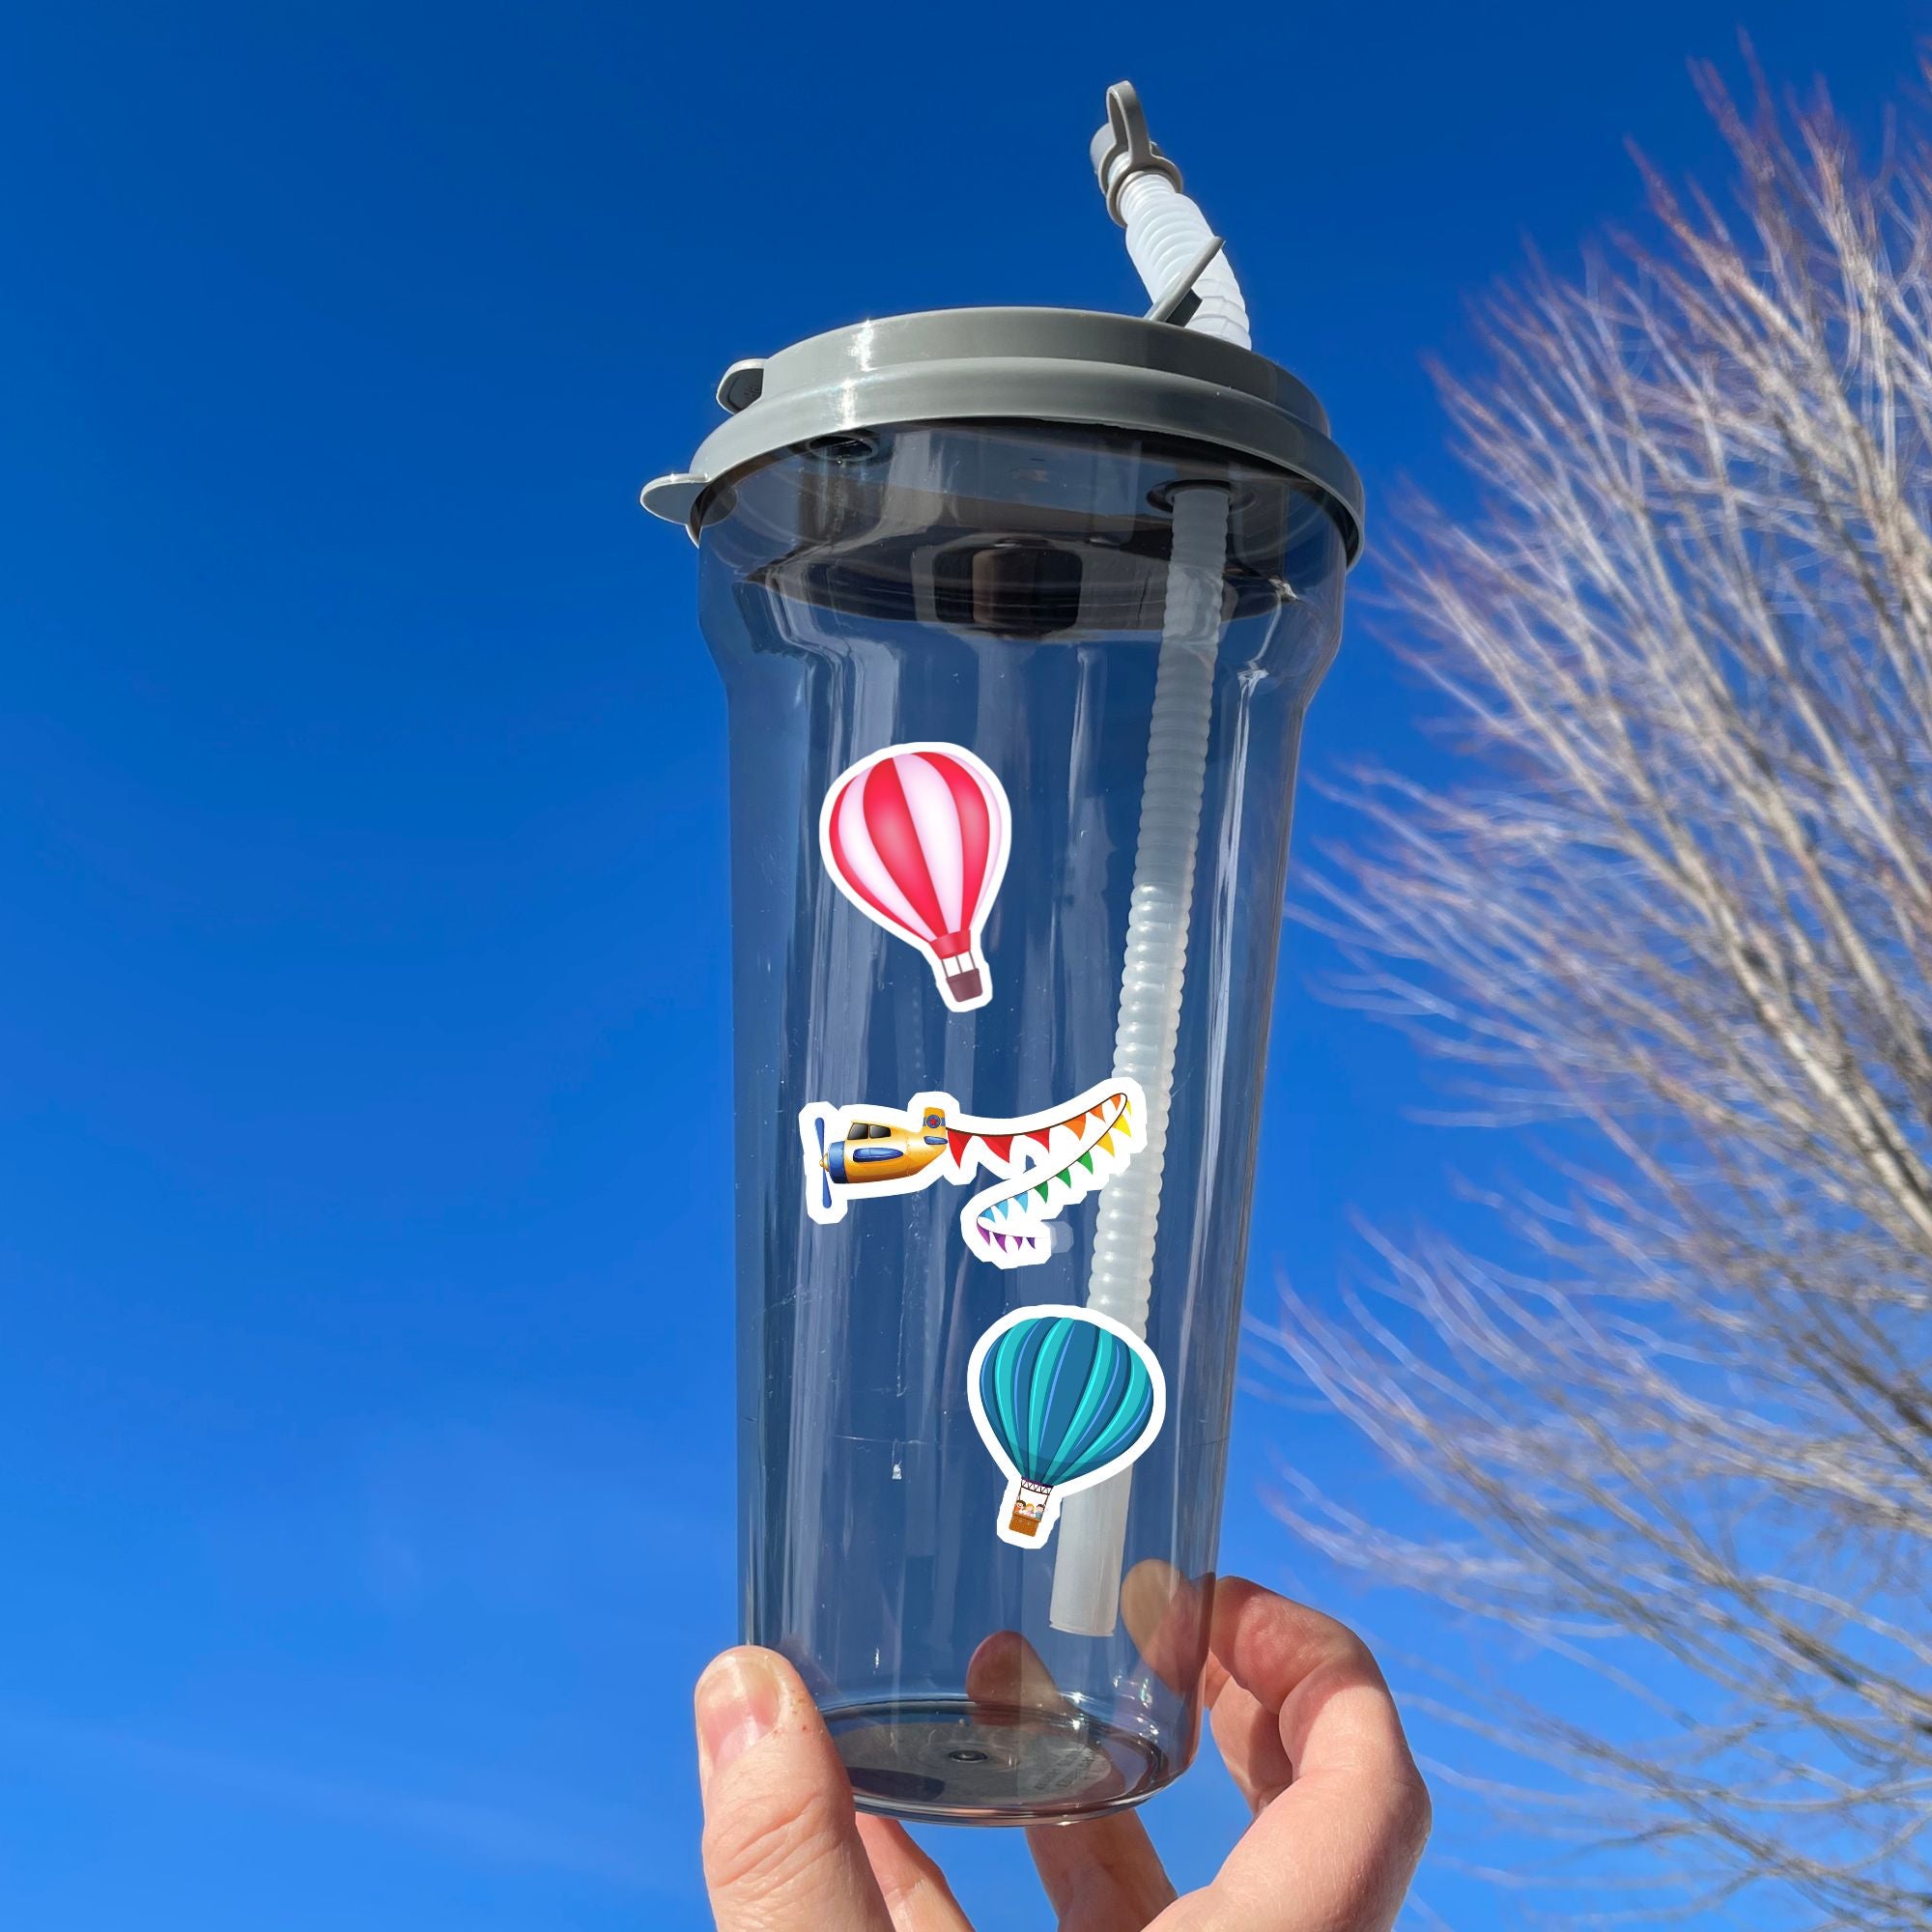 Fly away in a hot air balloon, a plane, or a helicopter with this sticker sheet. This image shows a water bottle with stickers of a red and white hot air balloon, a plan pulling a banner of multi-colored triangle flags, and a blue striped hot air balloon, applied to it.